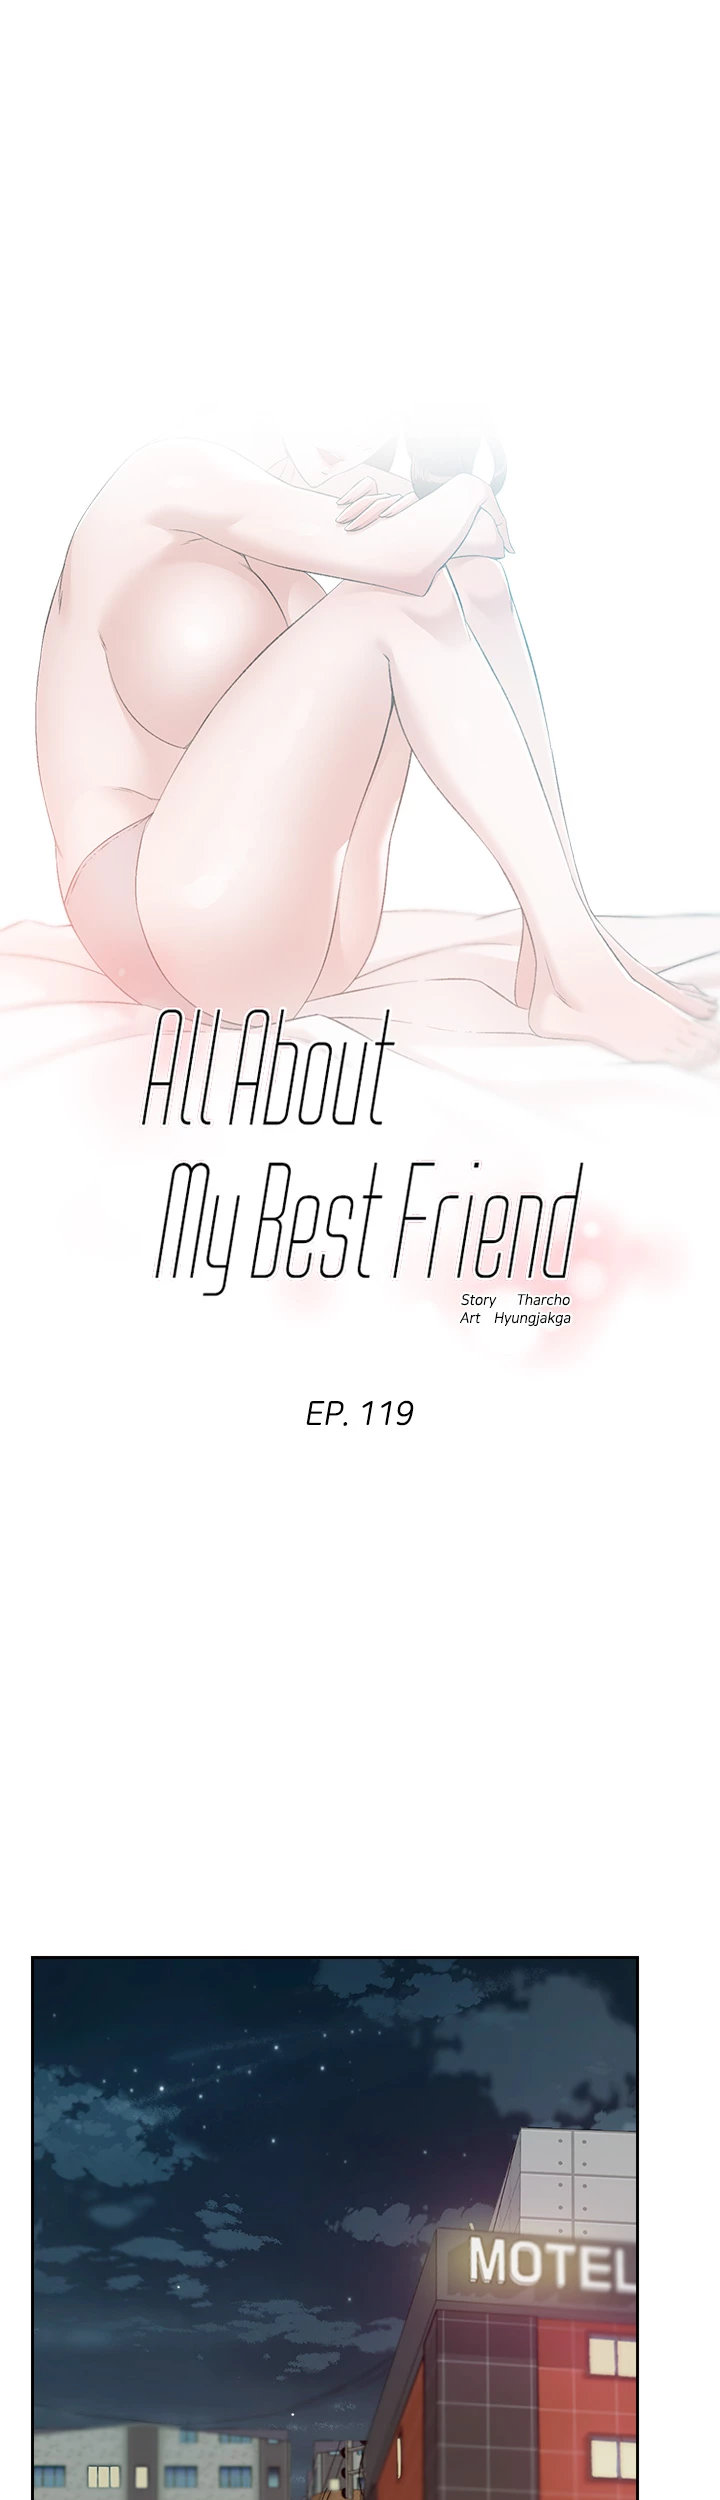 All About My Best Friend image